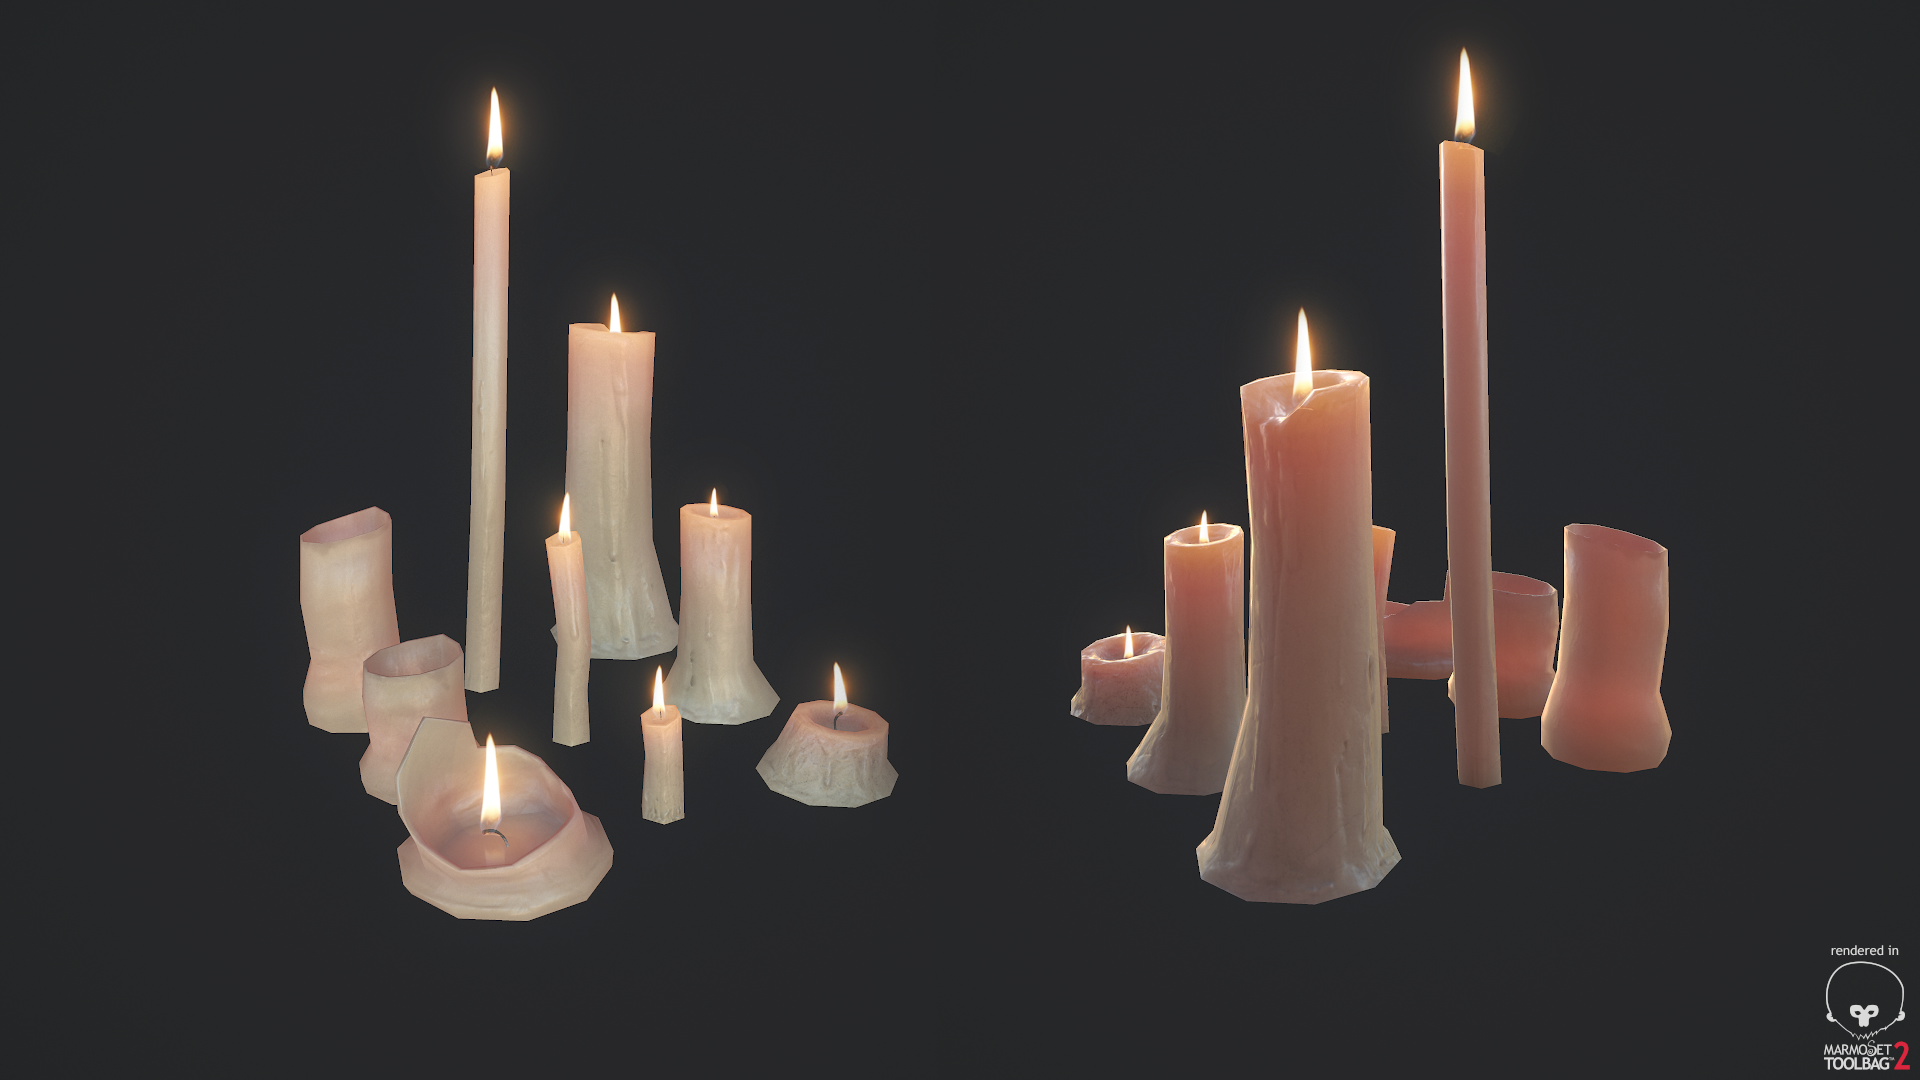 HQ Melting Candle Wallpapers | File 1433.72Kb